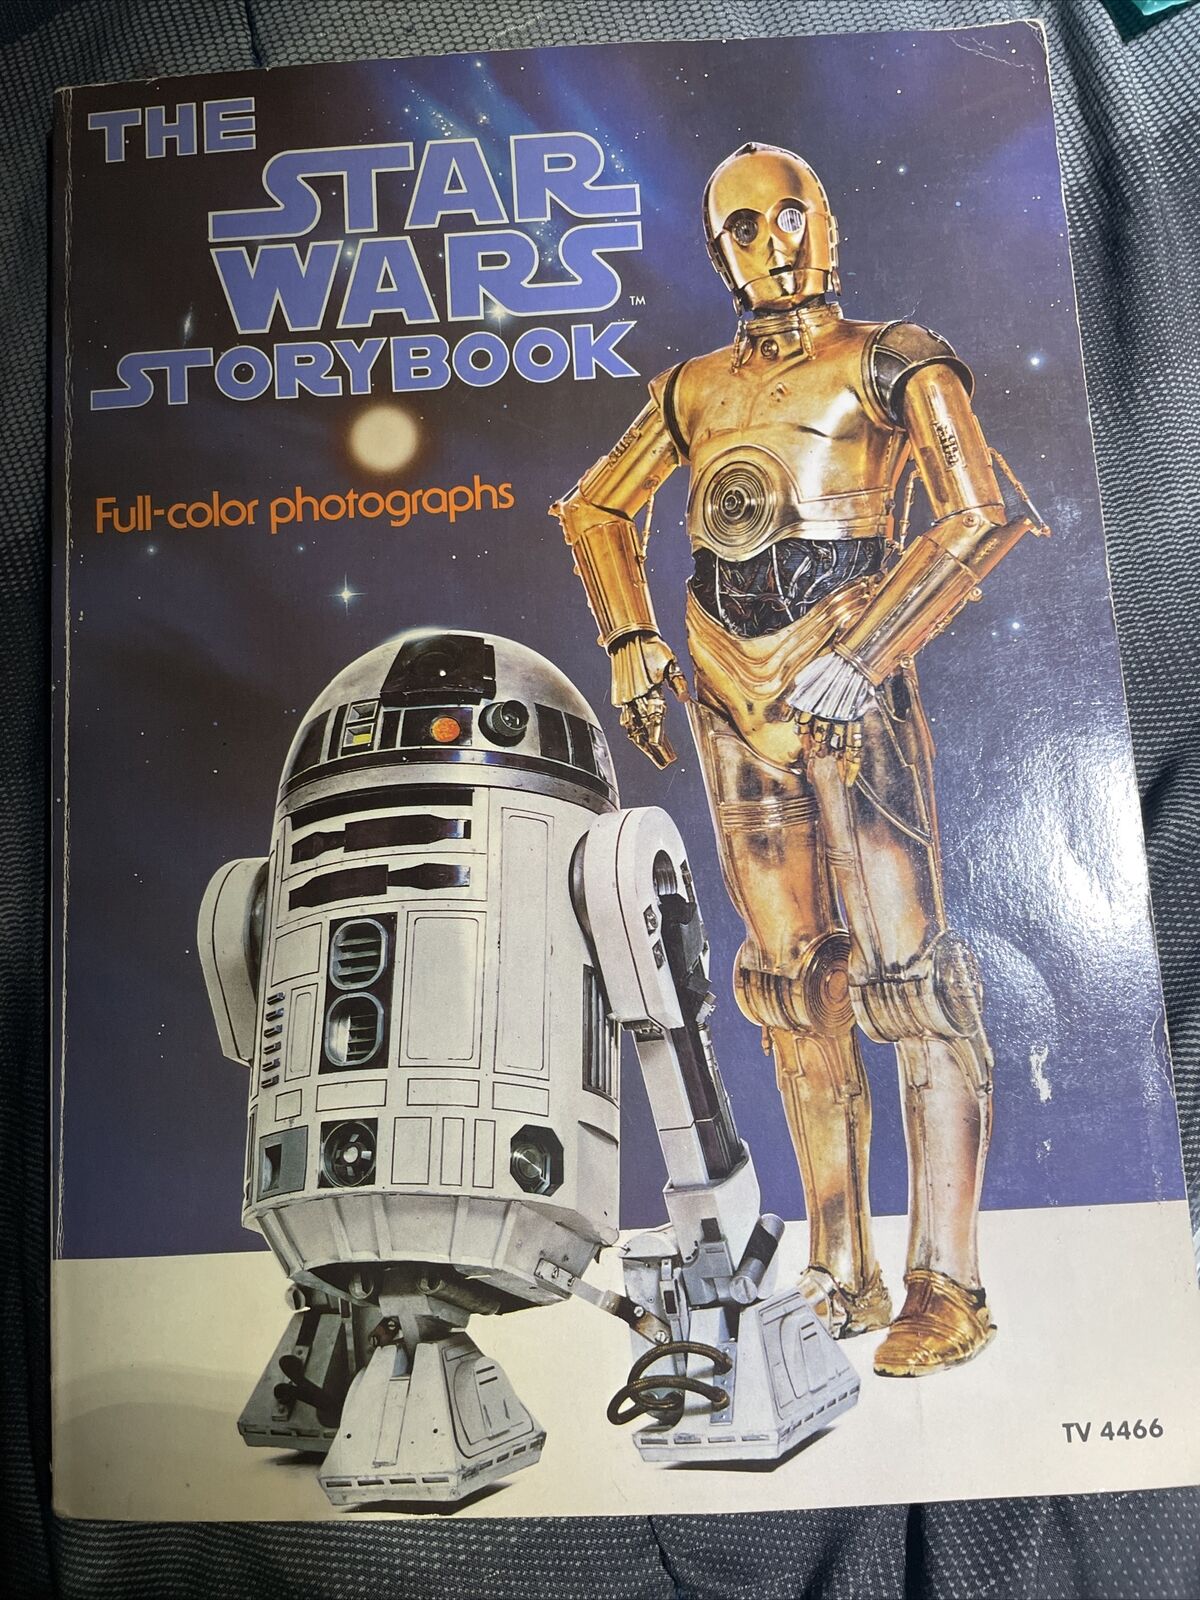 THE STAR WARS STORY BOOK 1978